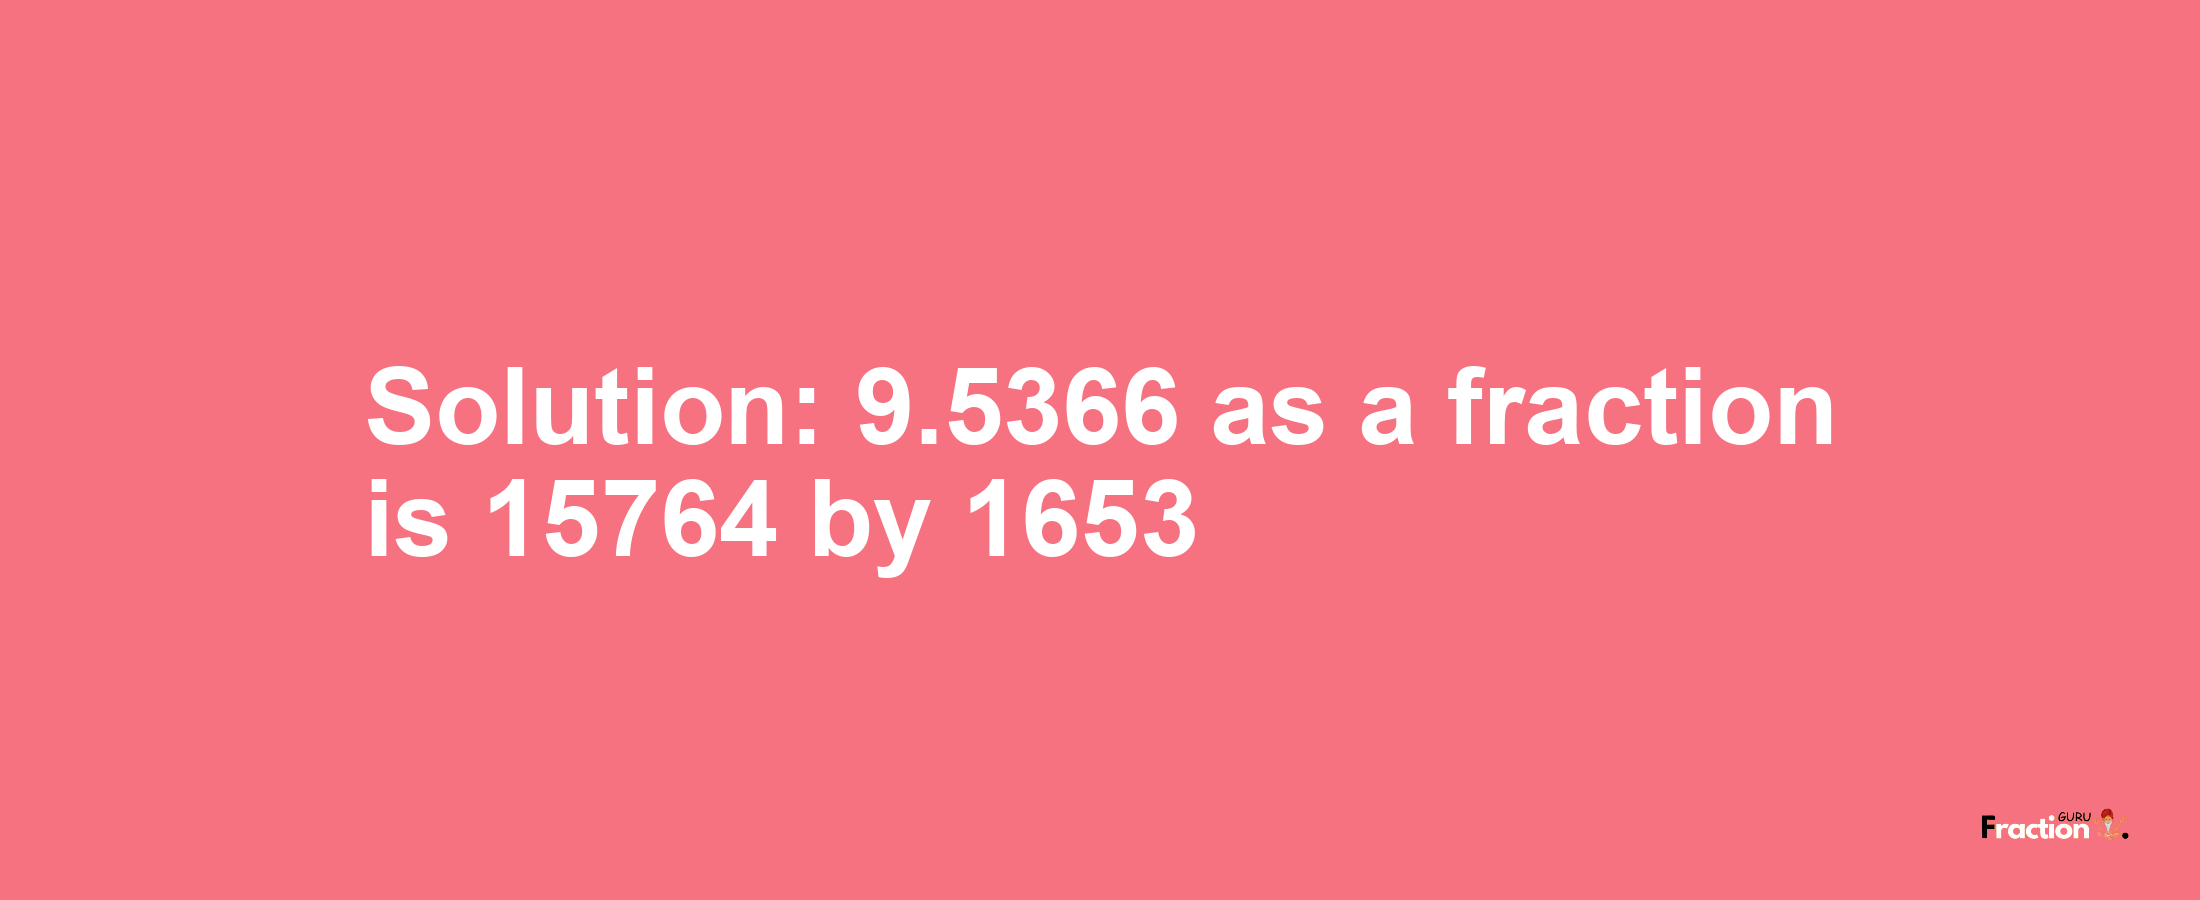 Solution:9.5366 as a fraction is 15764/1653